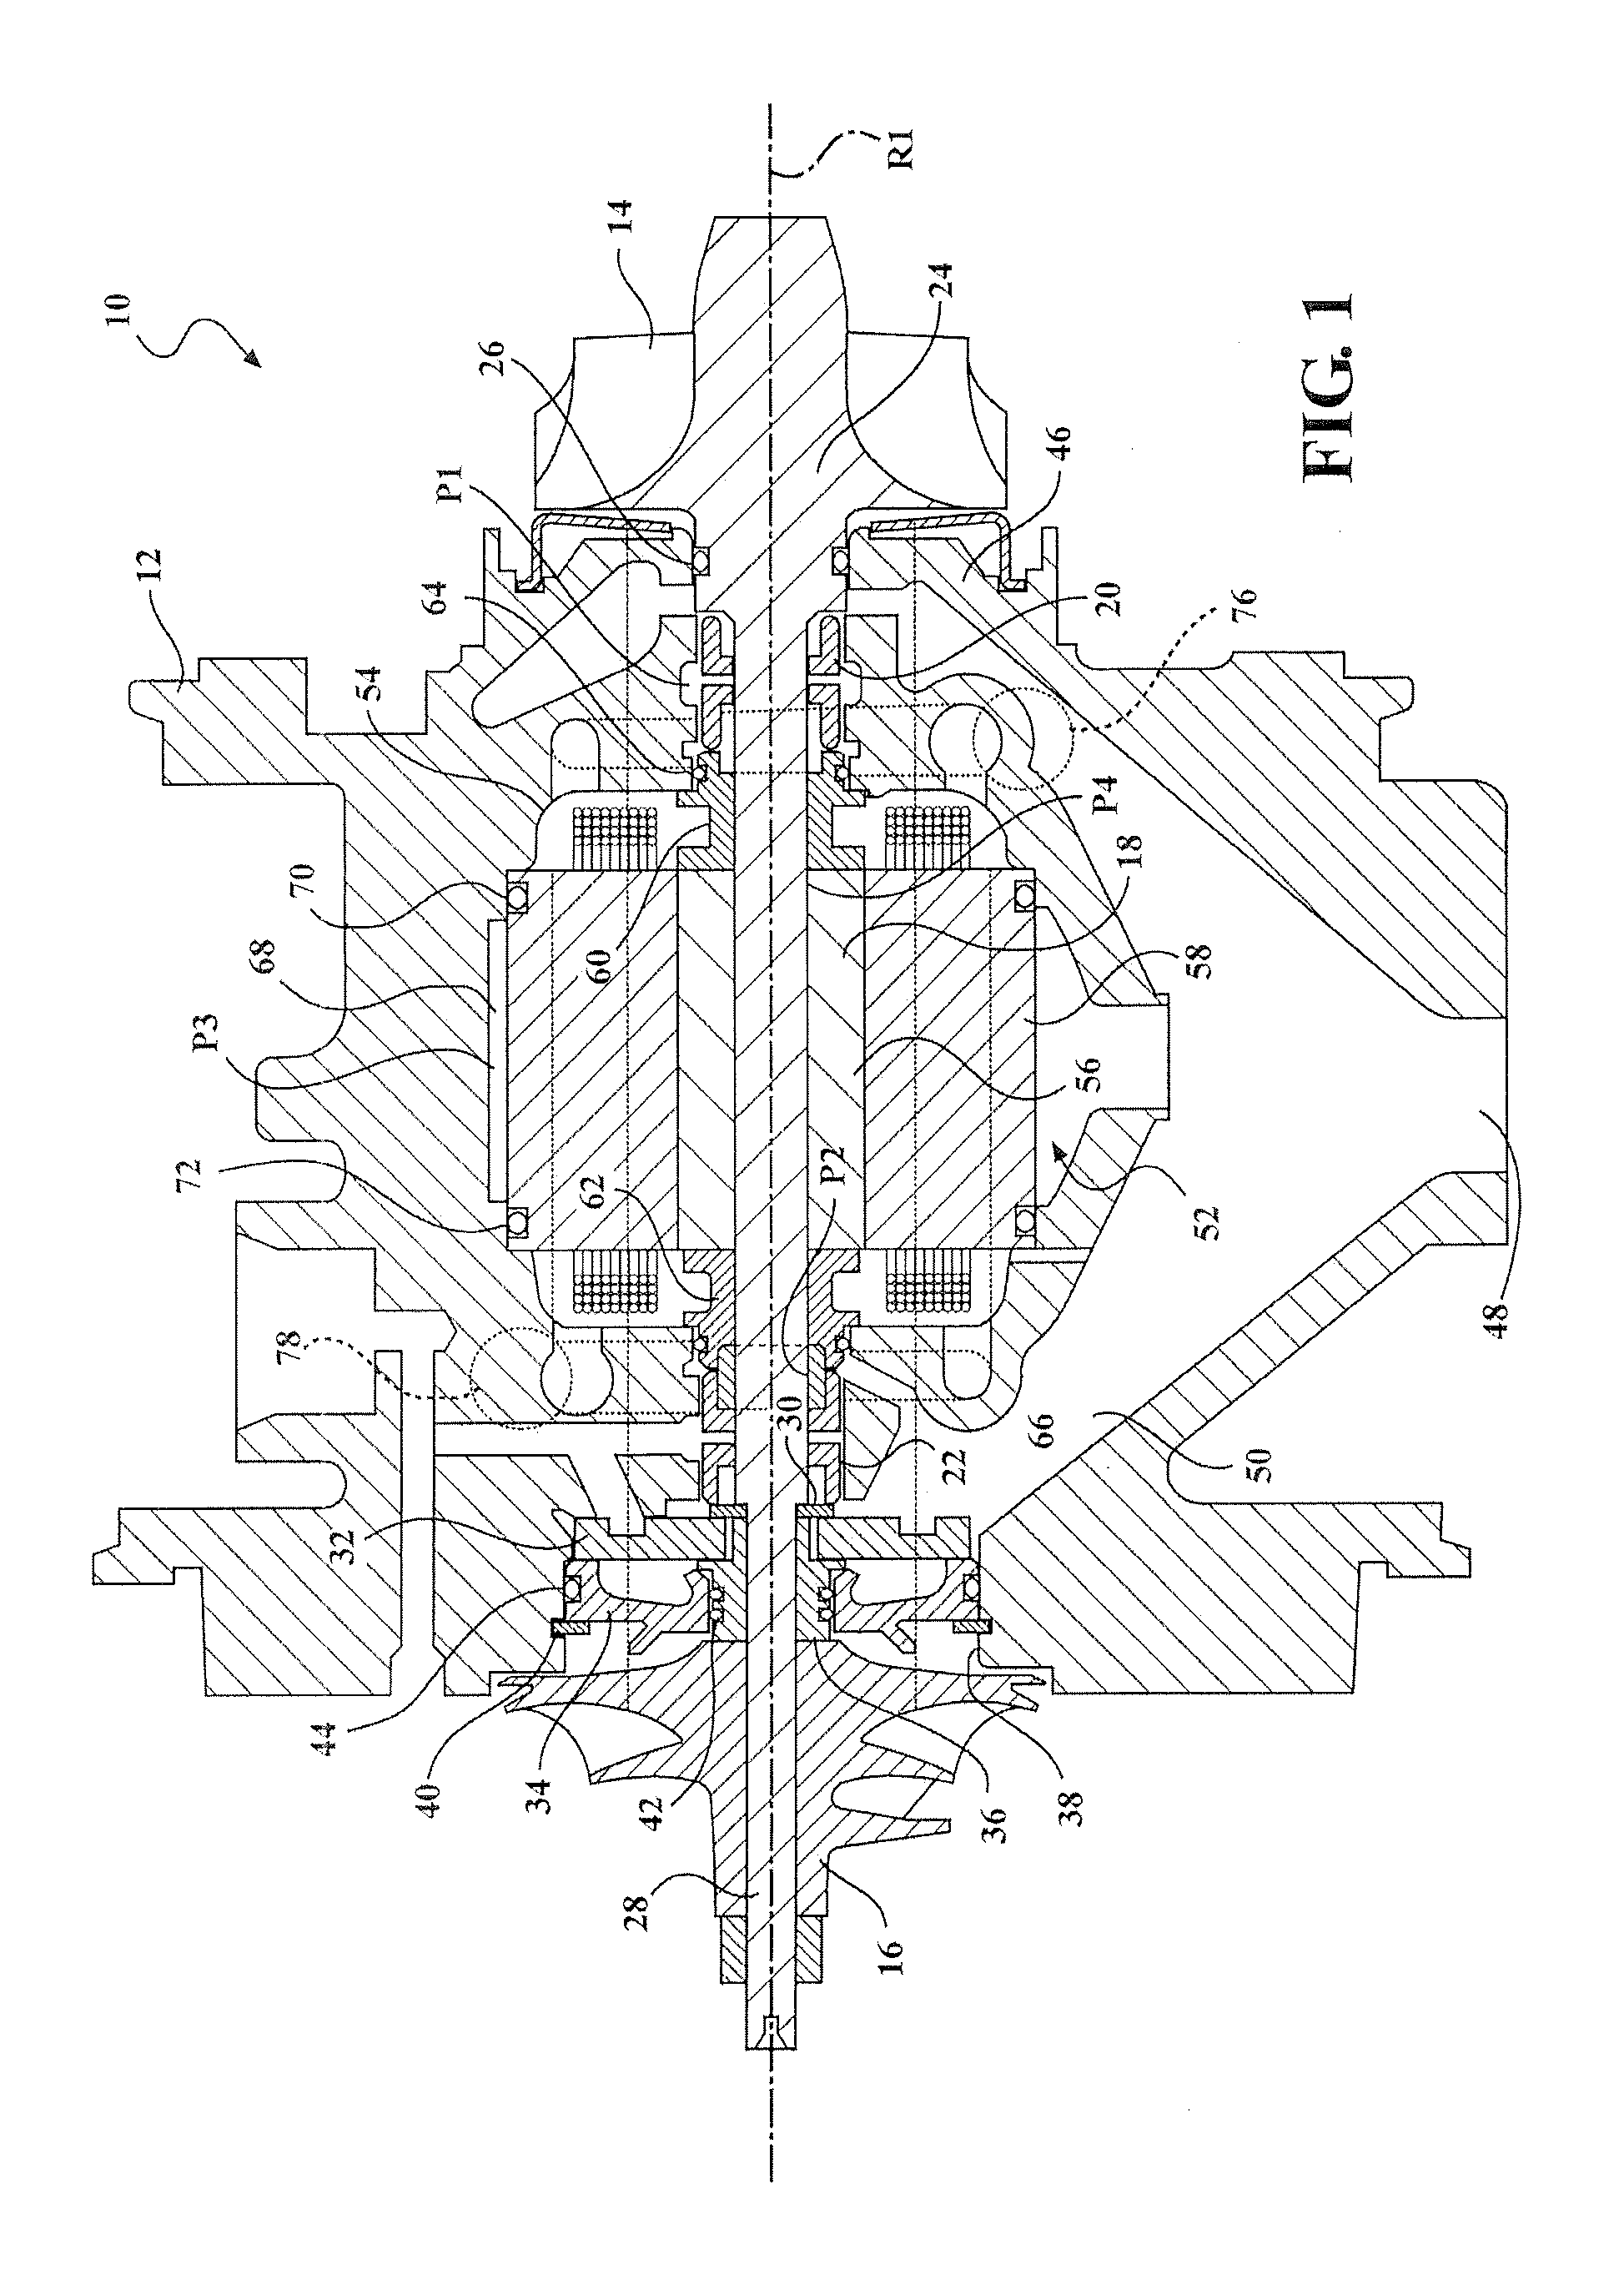 Supplemental air cooling system and air pressure oil sealing system for electrical turbocompound machine